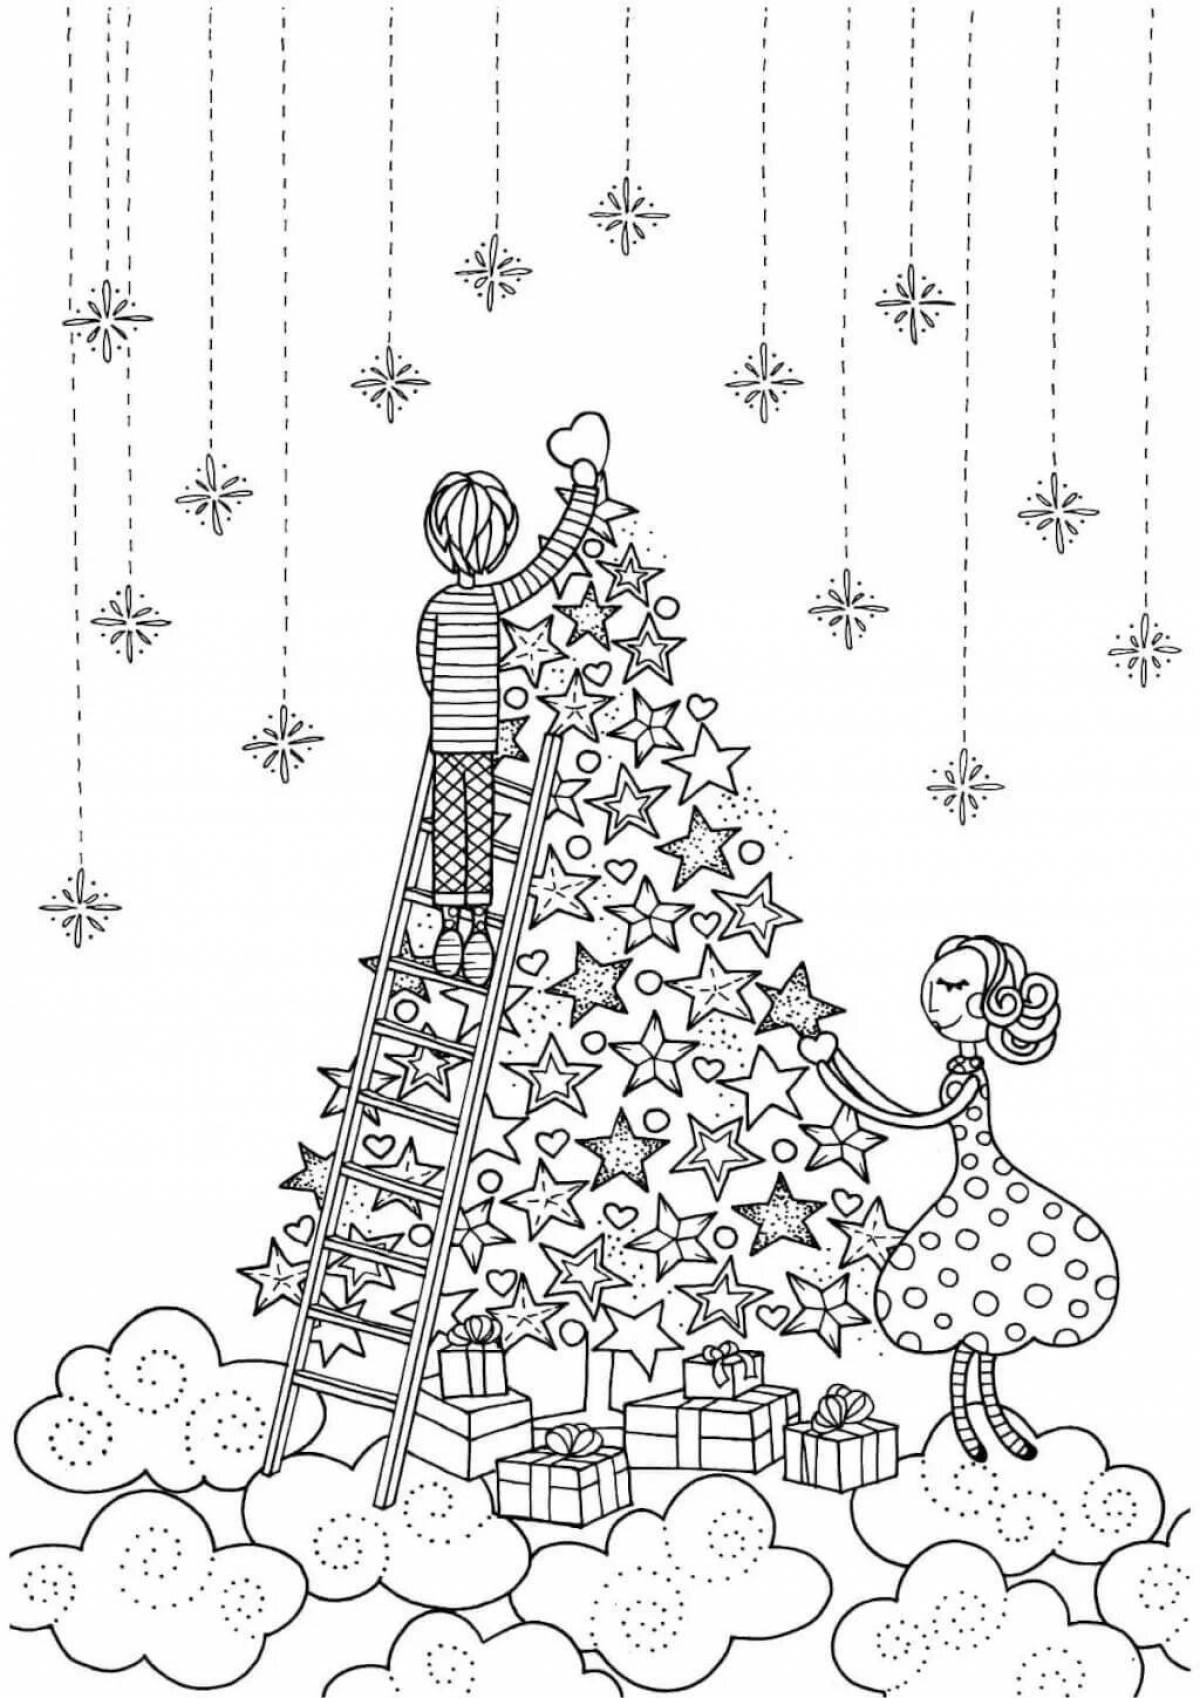 Glowing christmas coloring book for adults